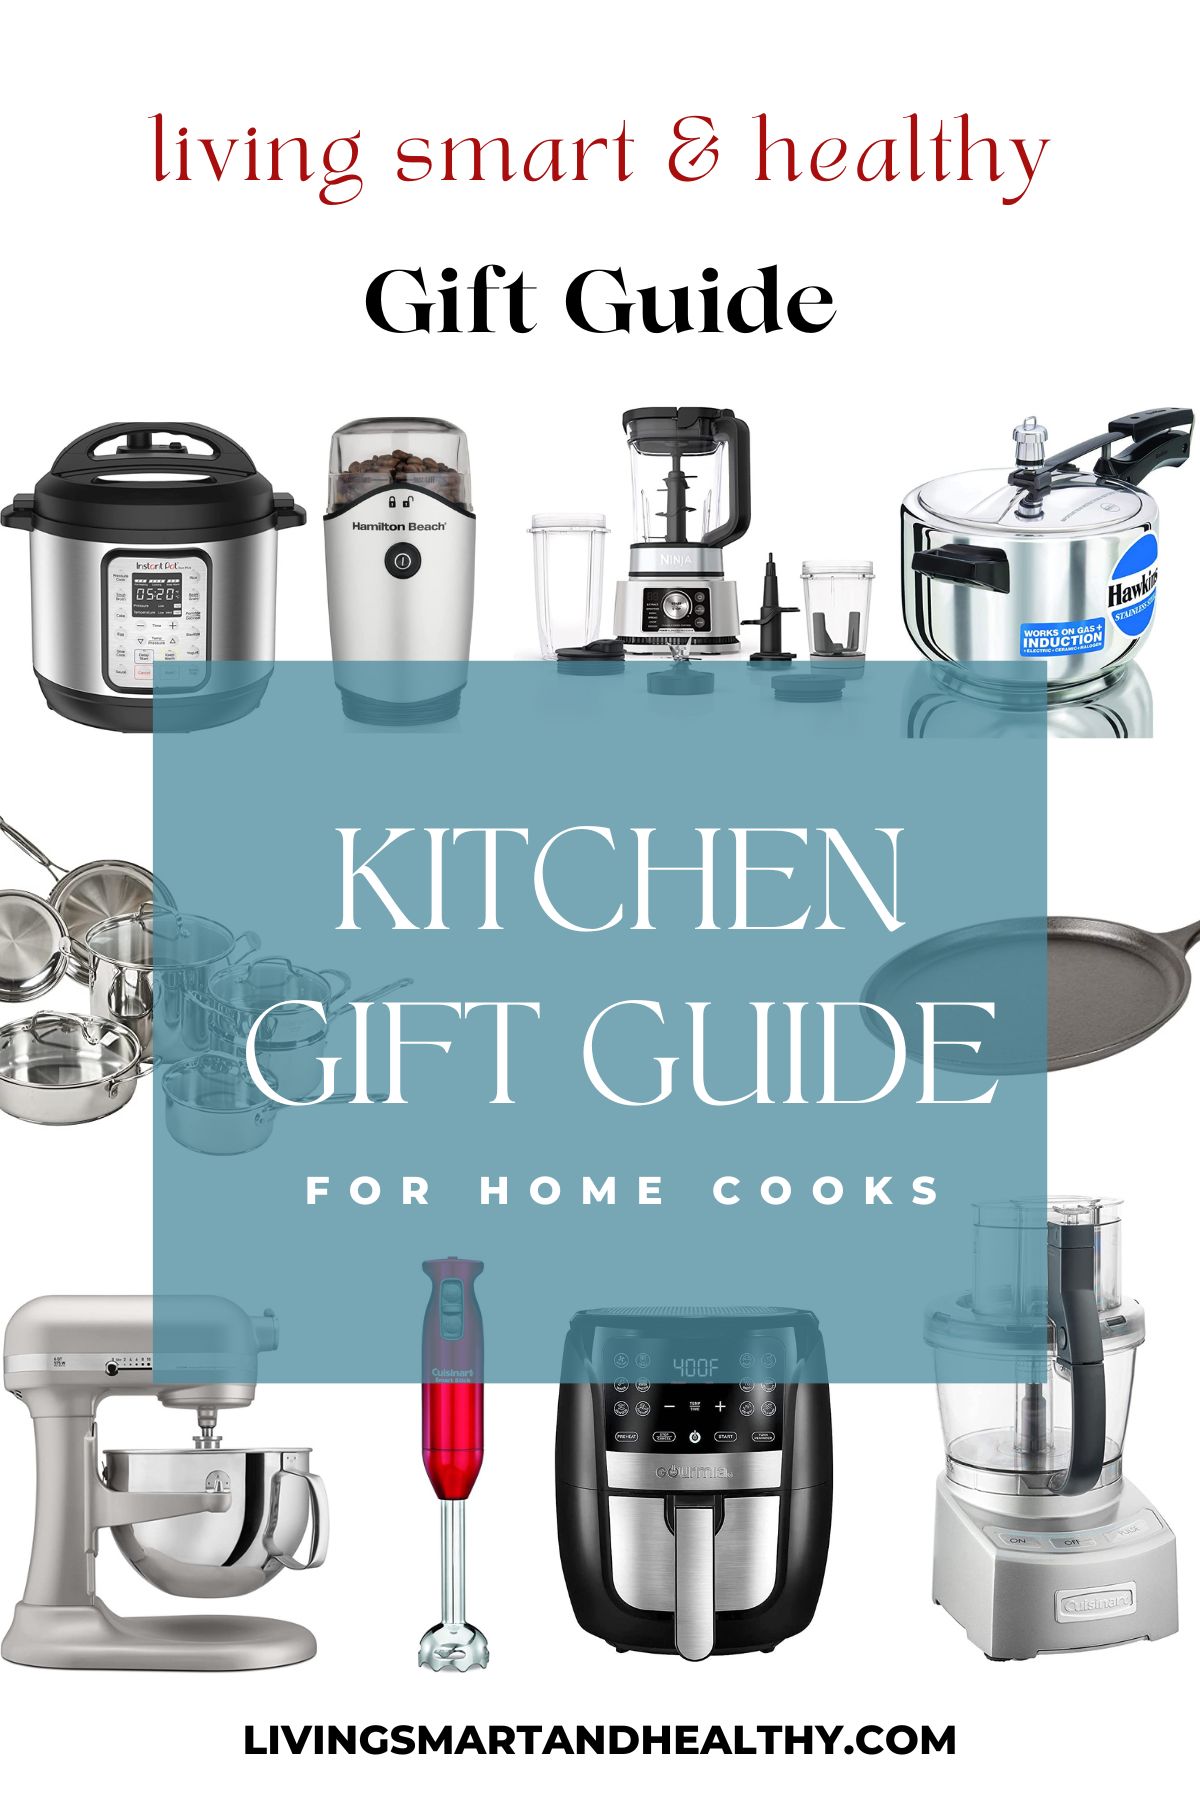 Kitchen Tools Gift Guide - Just Cook